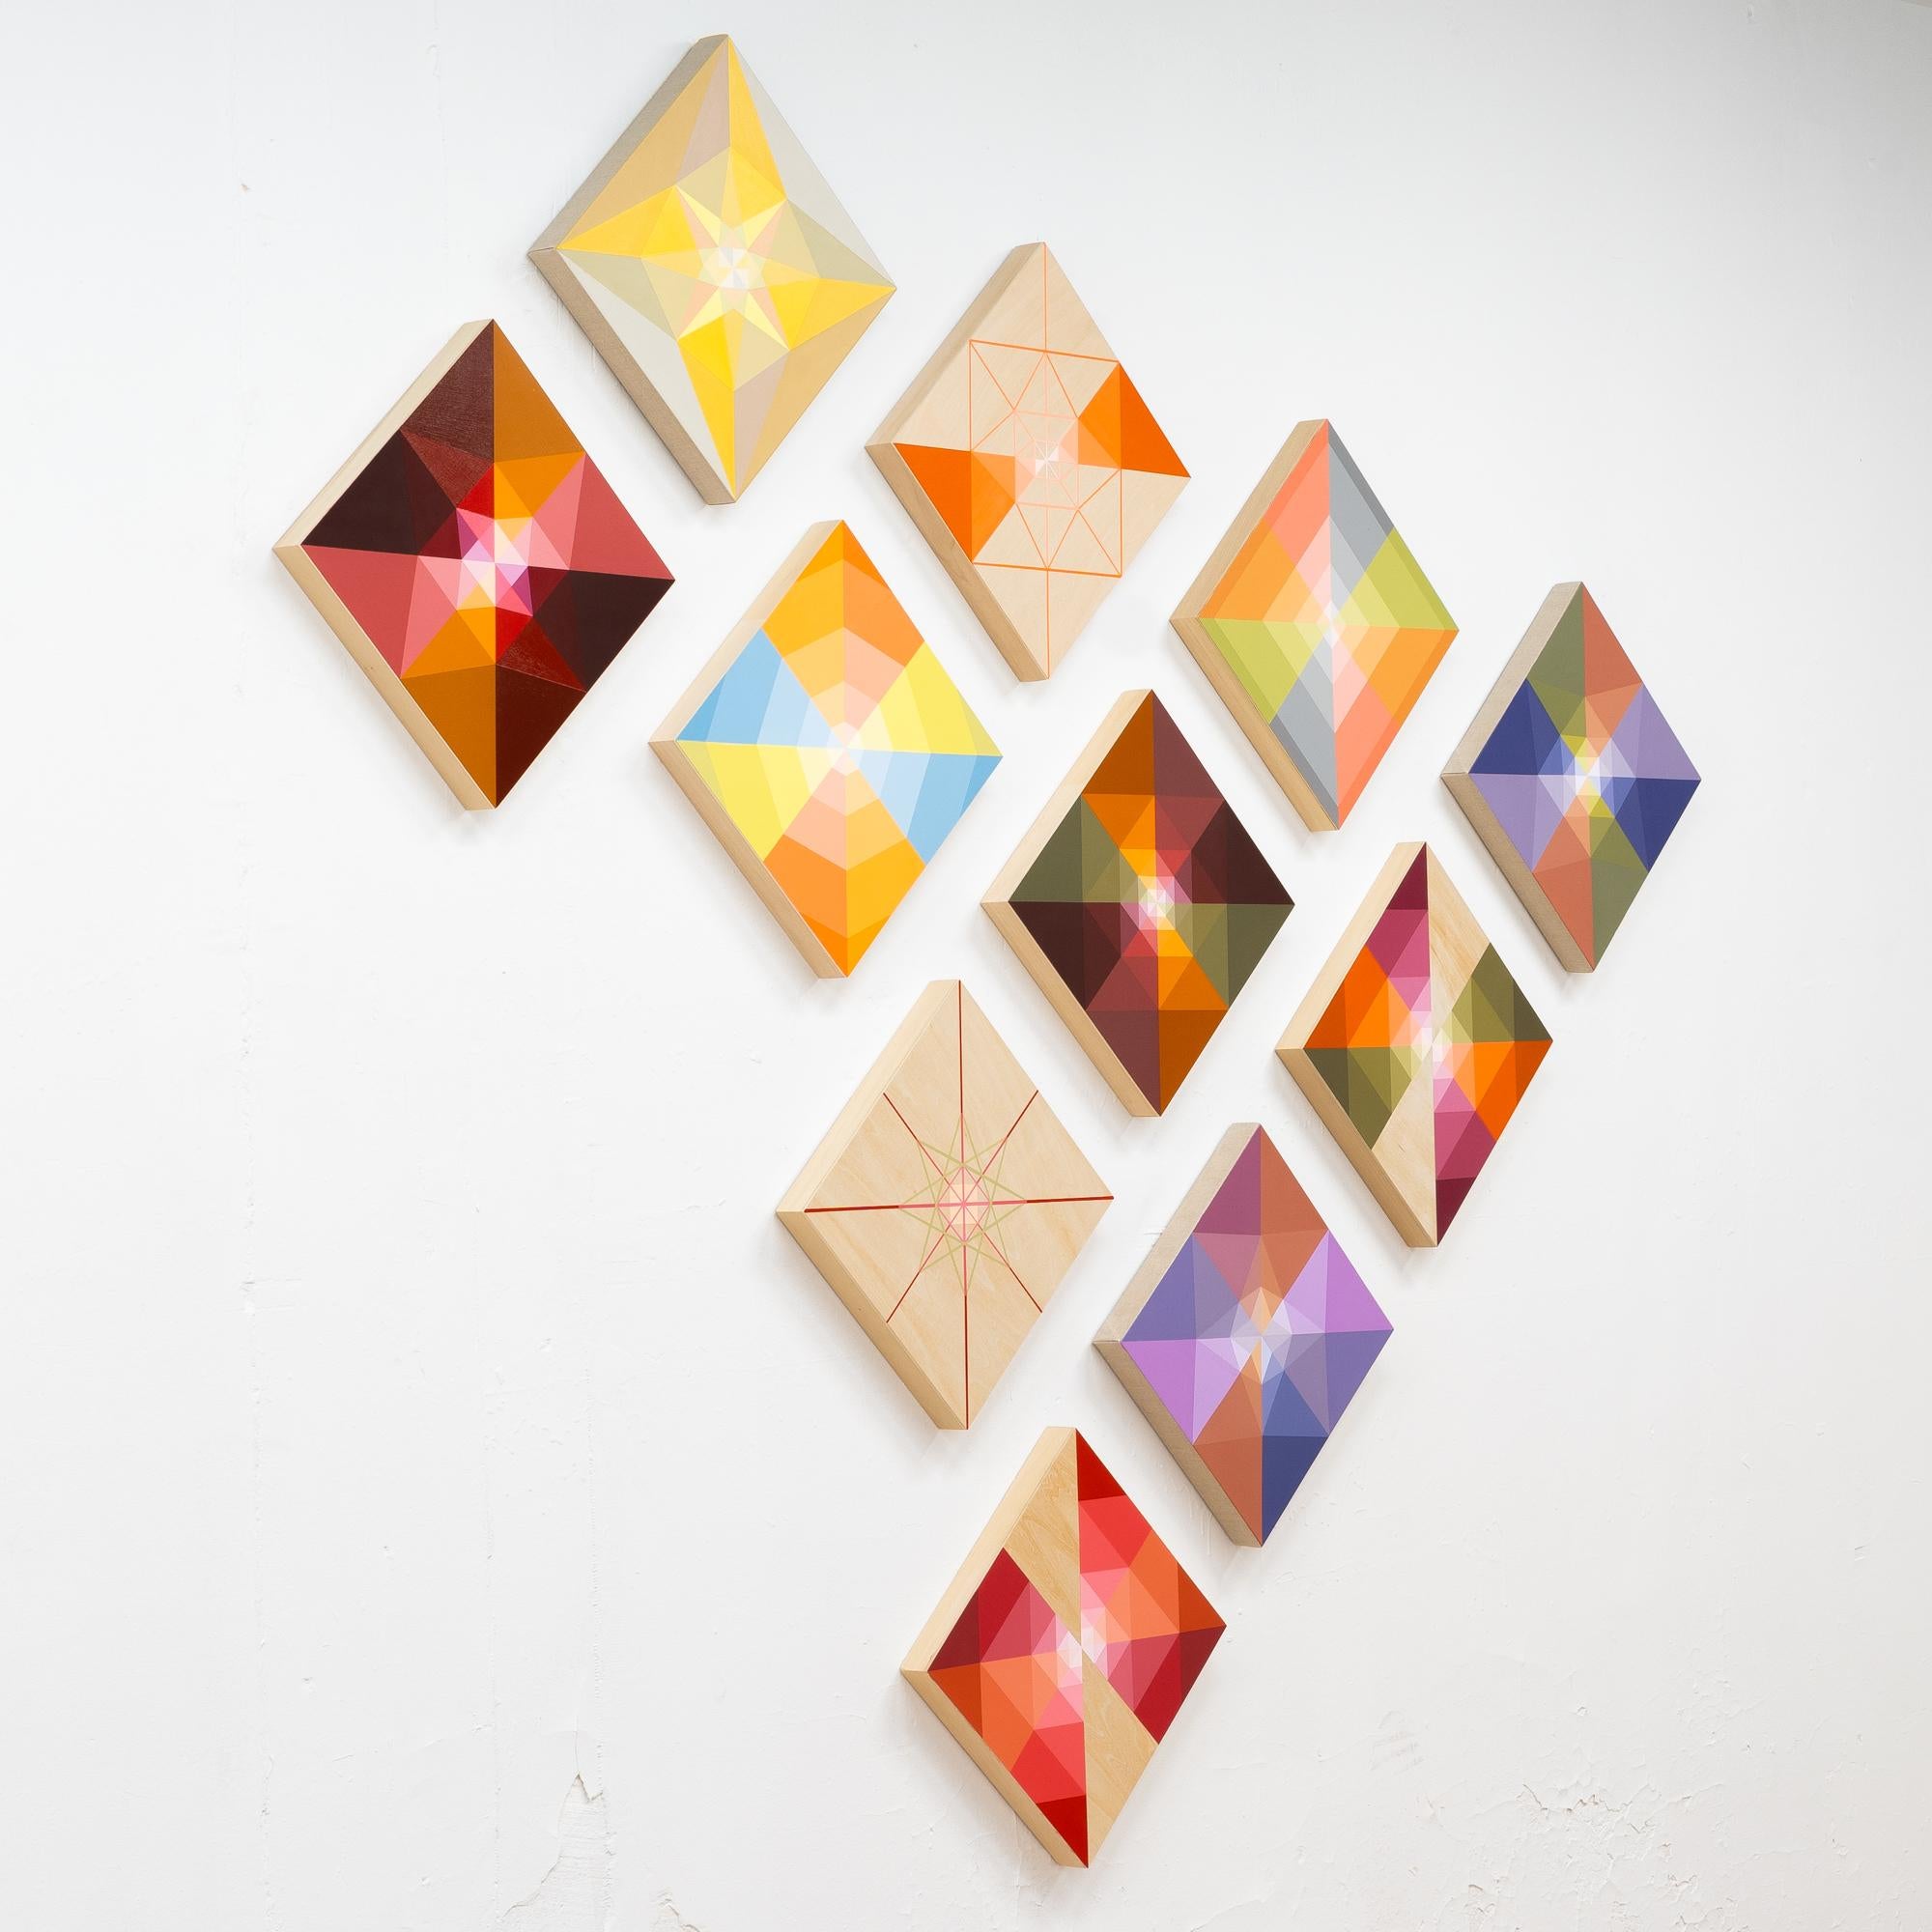 SUNDOG 8 - Diamond Abstract Painting with Raw Wood Panels and Geometric Forms For Sale 2